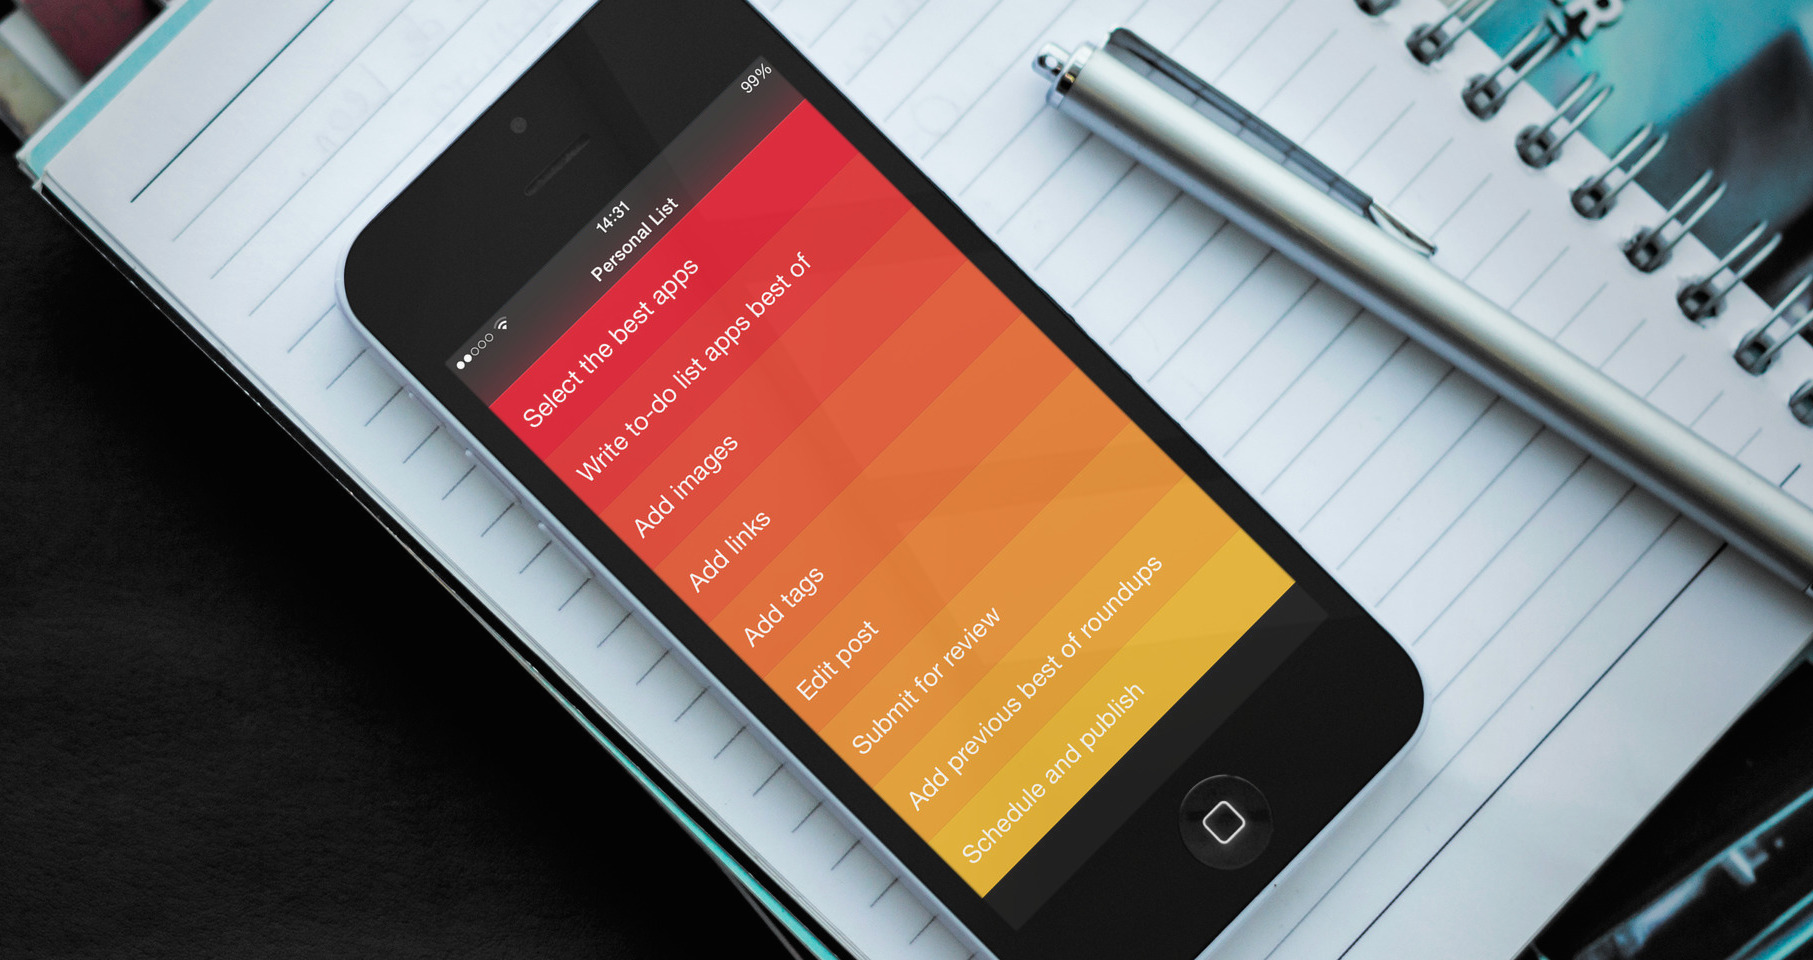 best to do list apps